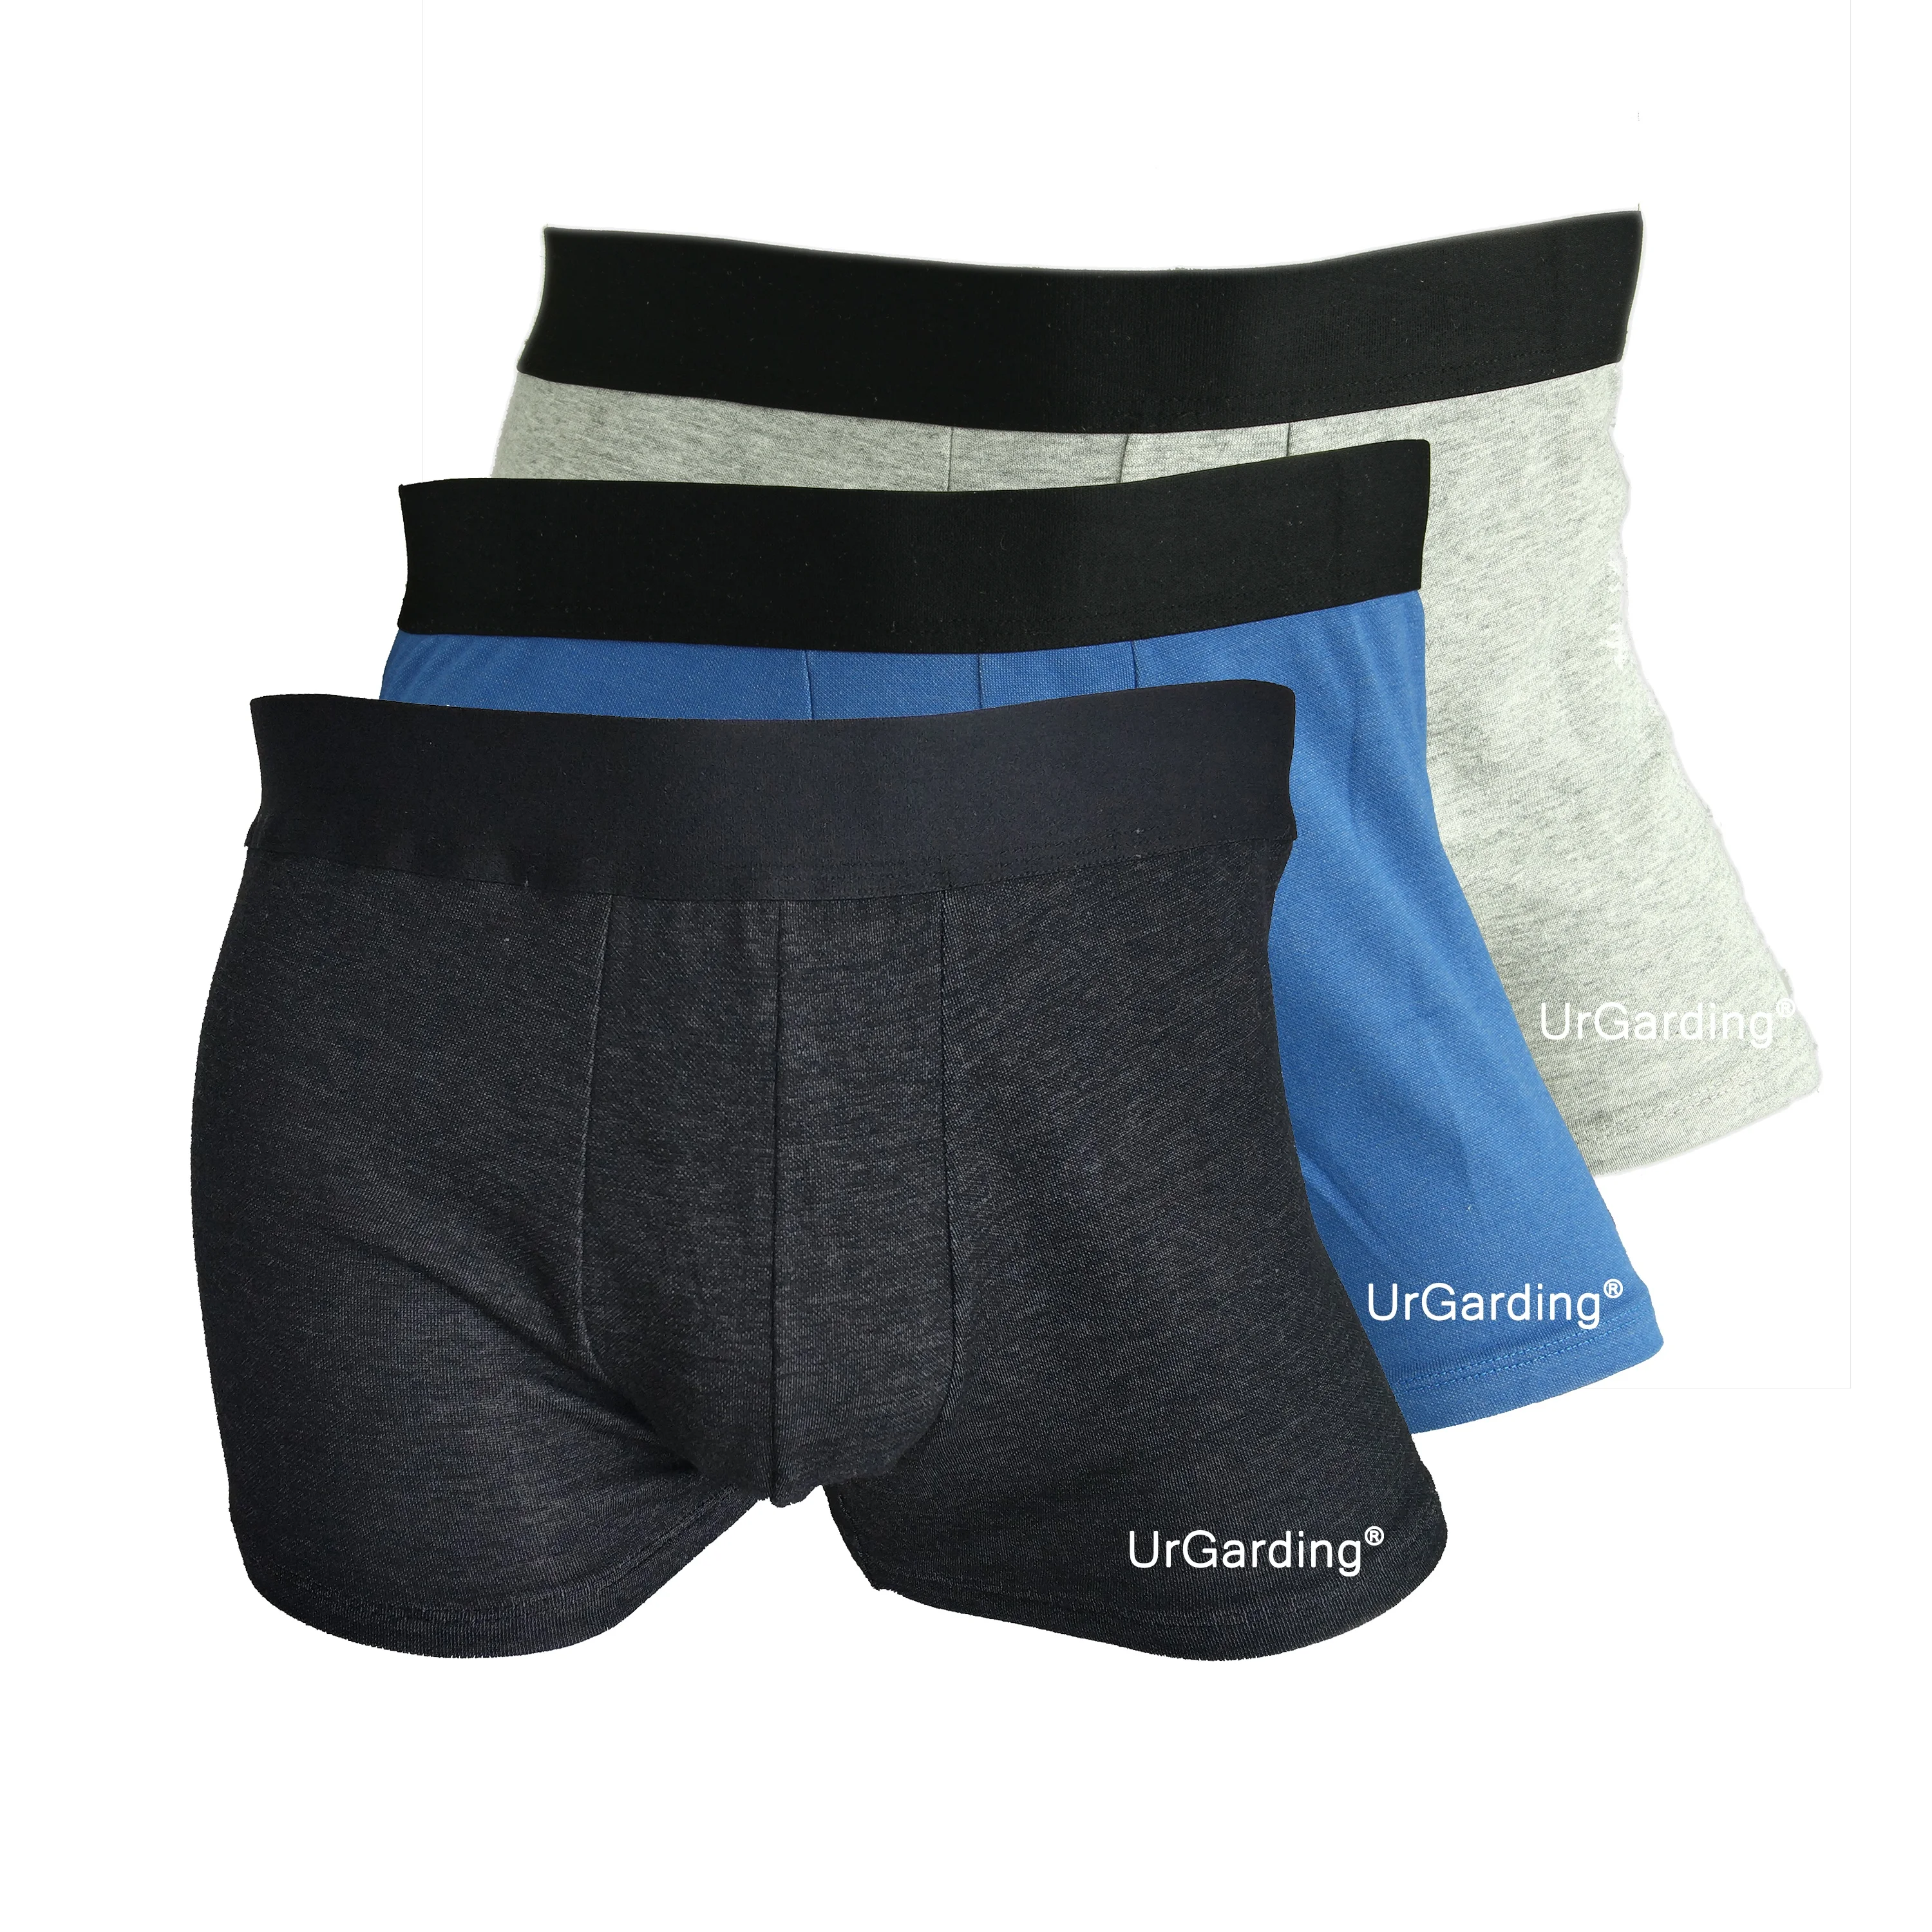 

UrGarding anti radiation protection emf shielding mens boxers brief underwear made with cotton and silver fiber